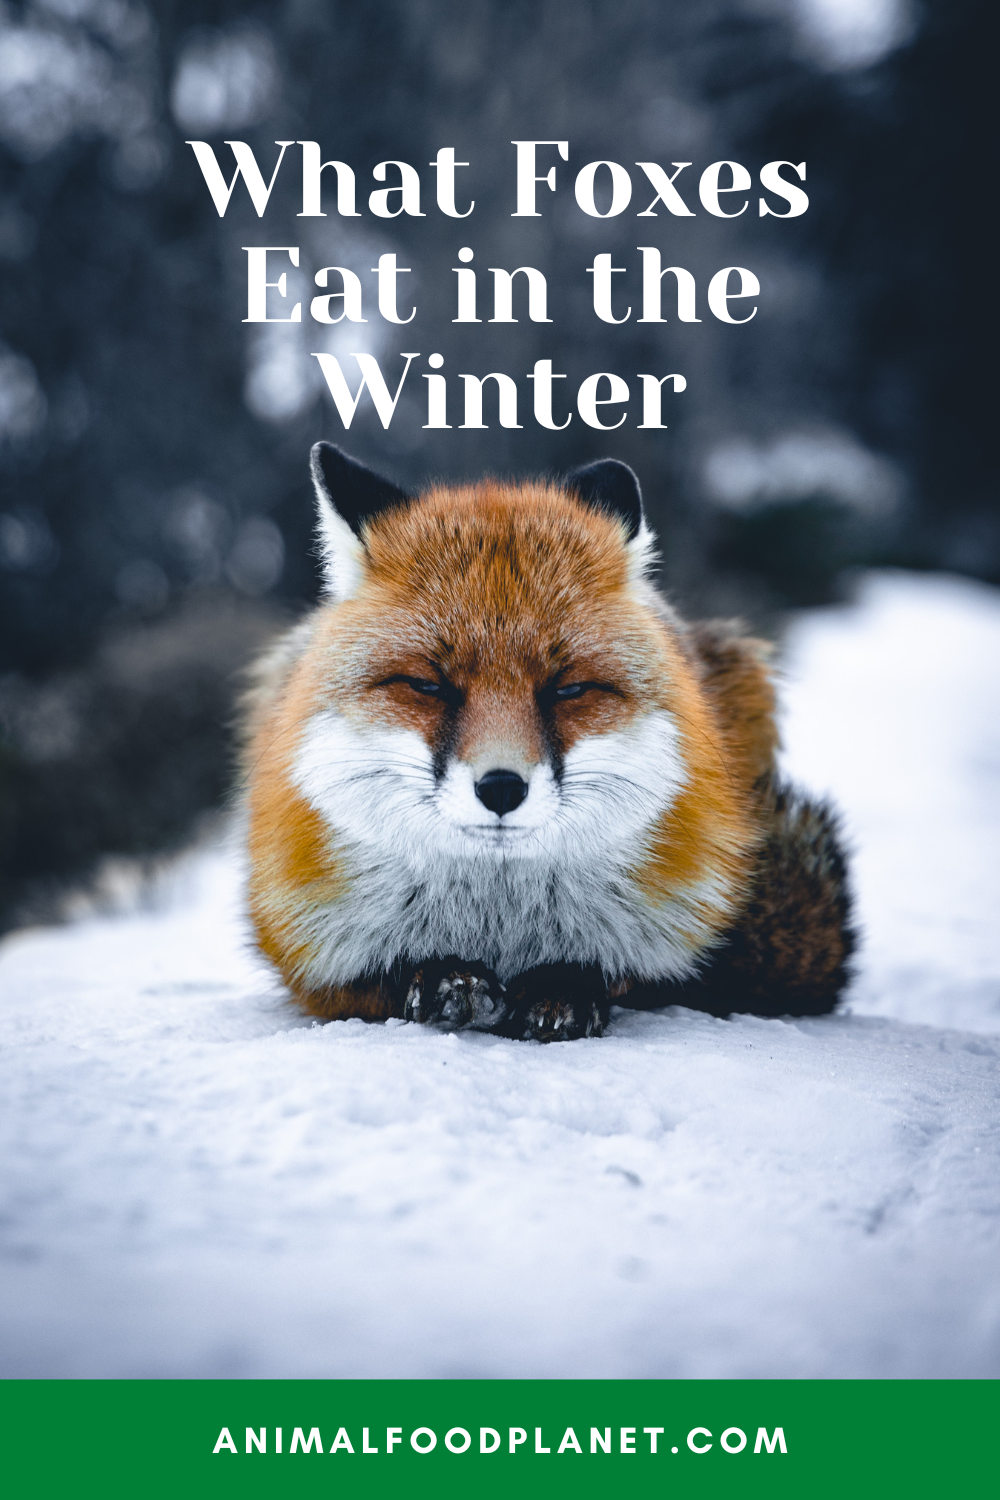 What Foxes Eat in the Winter?